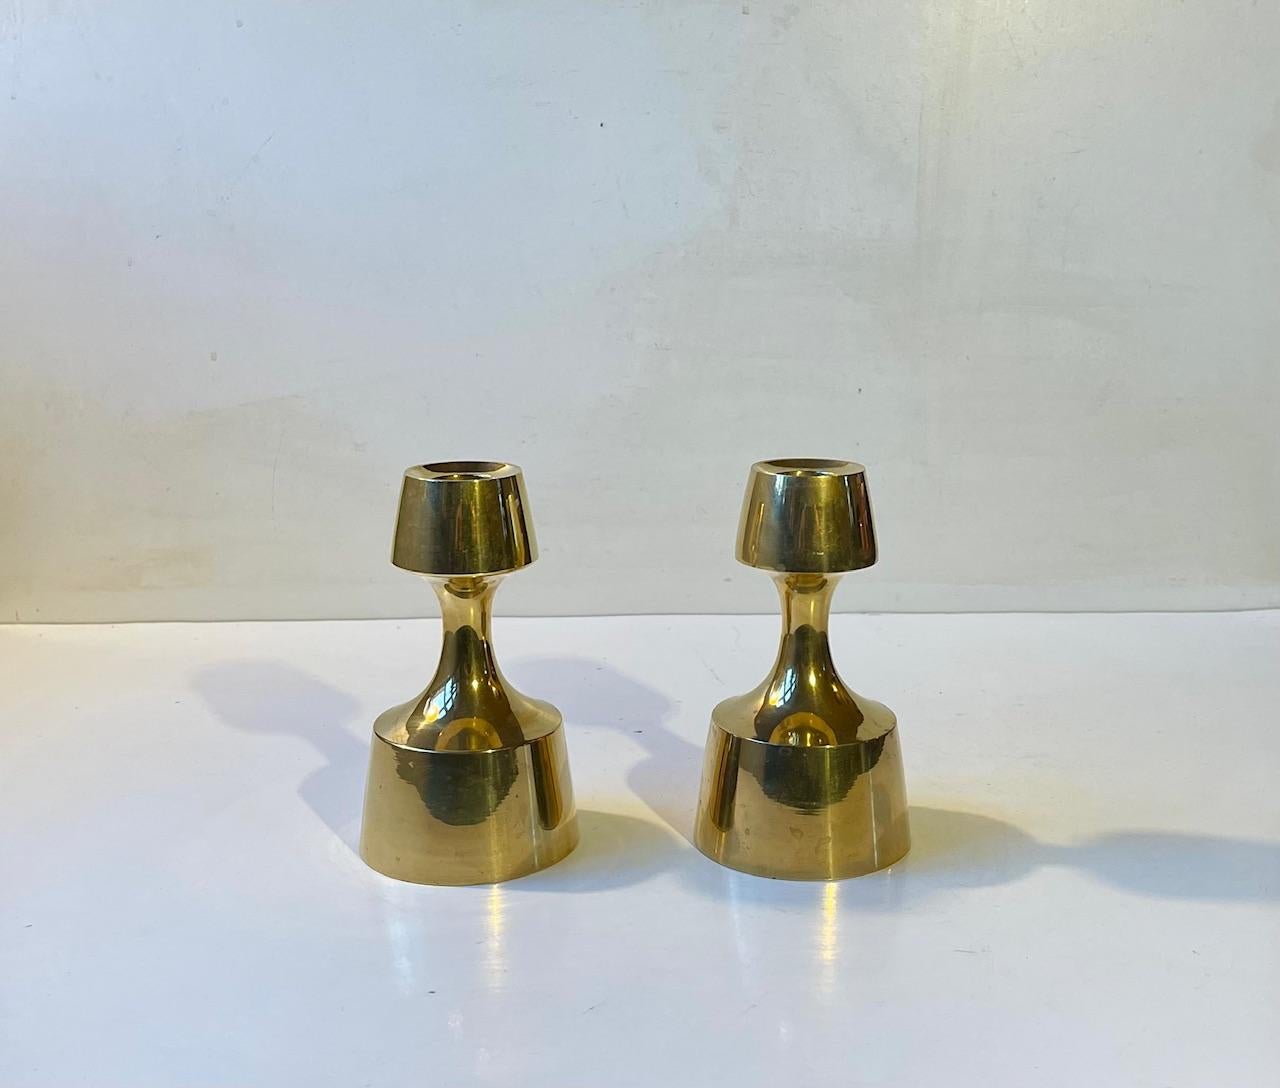 A pair of solid brass candlesticks designed and manufactured by by Cohr in Denmark during the 1960s. The candlesticks are to be fitted with regular sixed candles. The style of this set is reminiscent to Jens Harald Quistgaard and Cohr Fredericia.